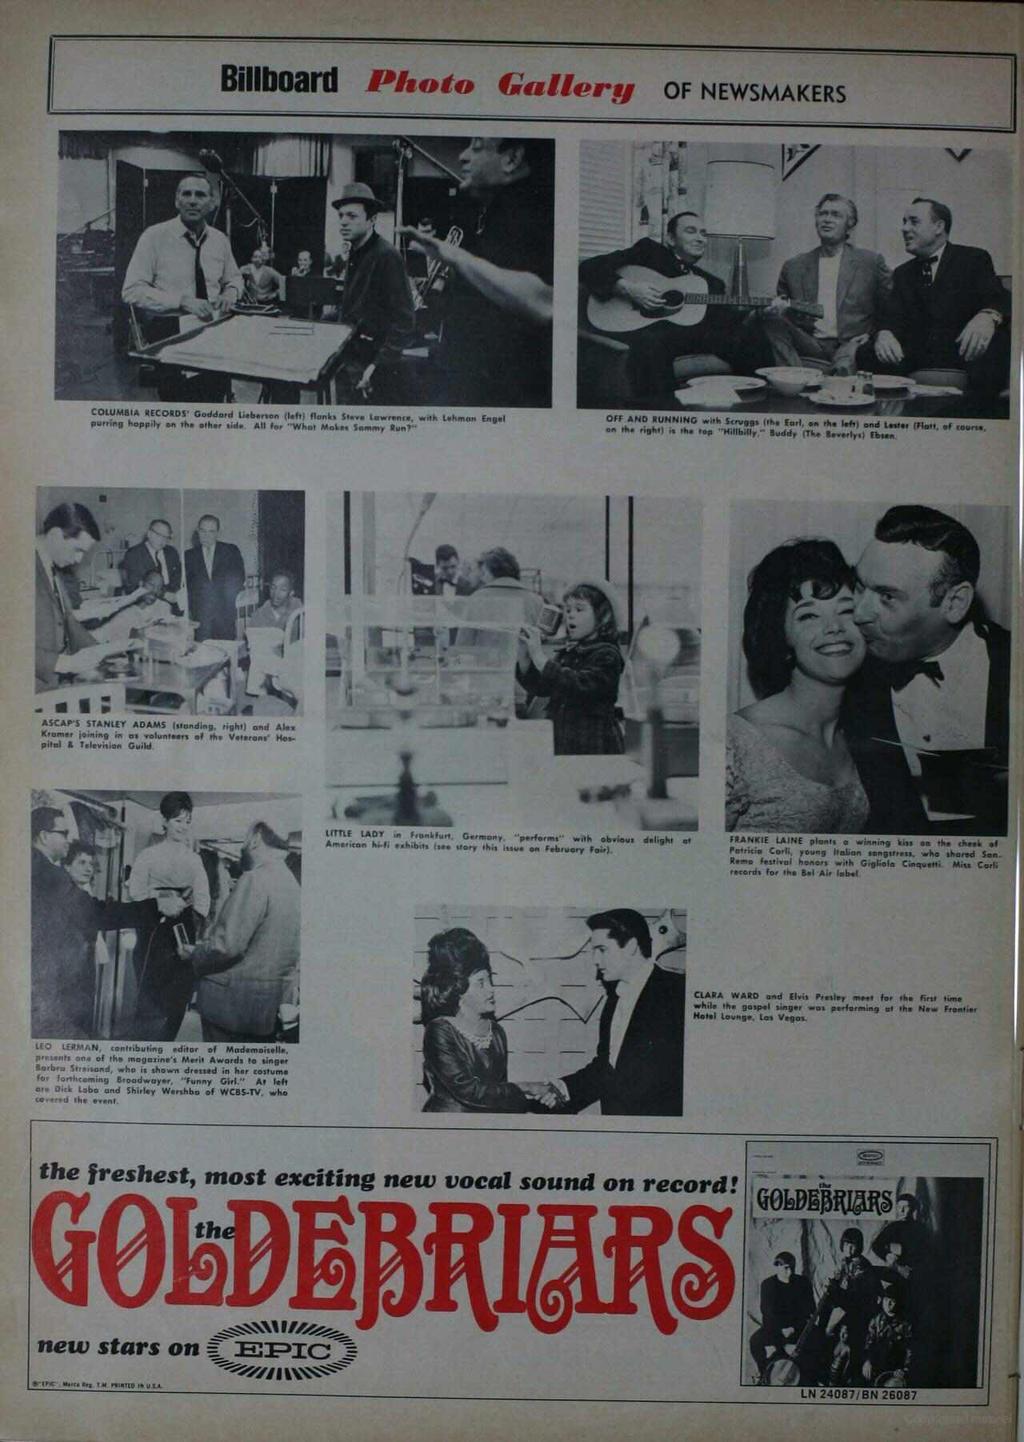 Billboard Photo Gallery OF NEWSMAKERS COLUMBIA RECORDS' Goddard lieberson heft) flanks Steve Lawrence, wish Lehman Engel purring happily on the other sid All for "What Makes Sammy Runs" OFF AND